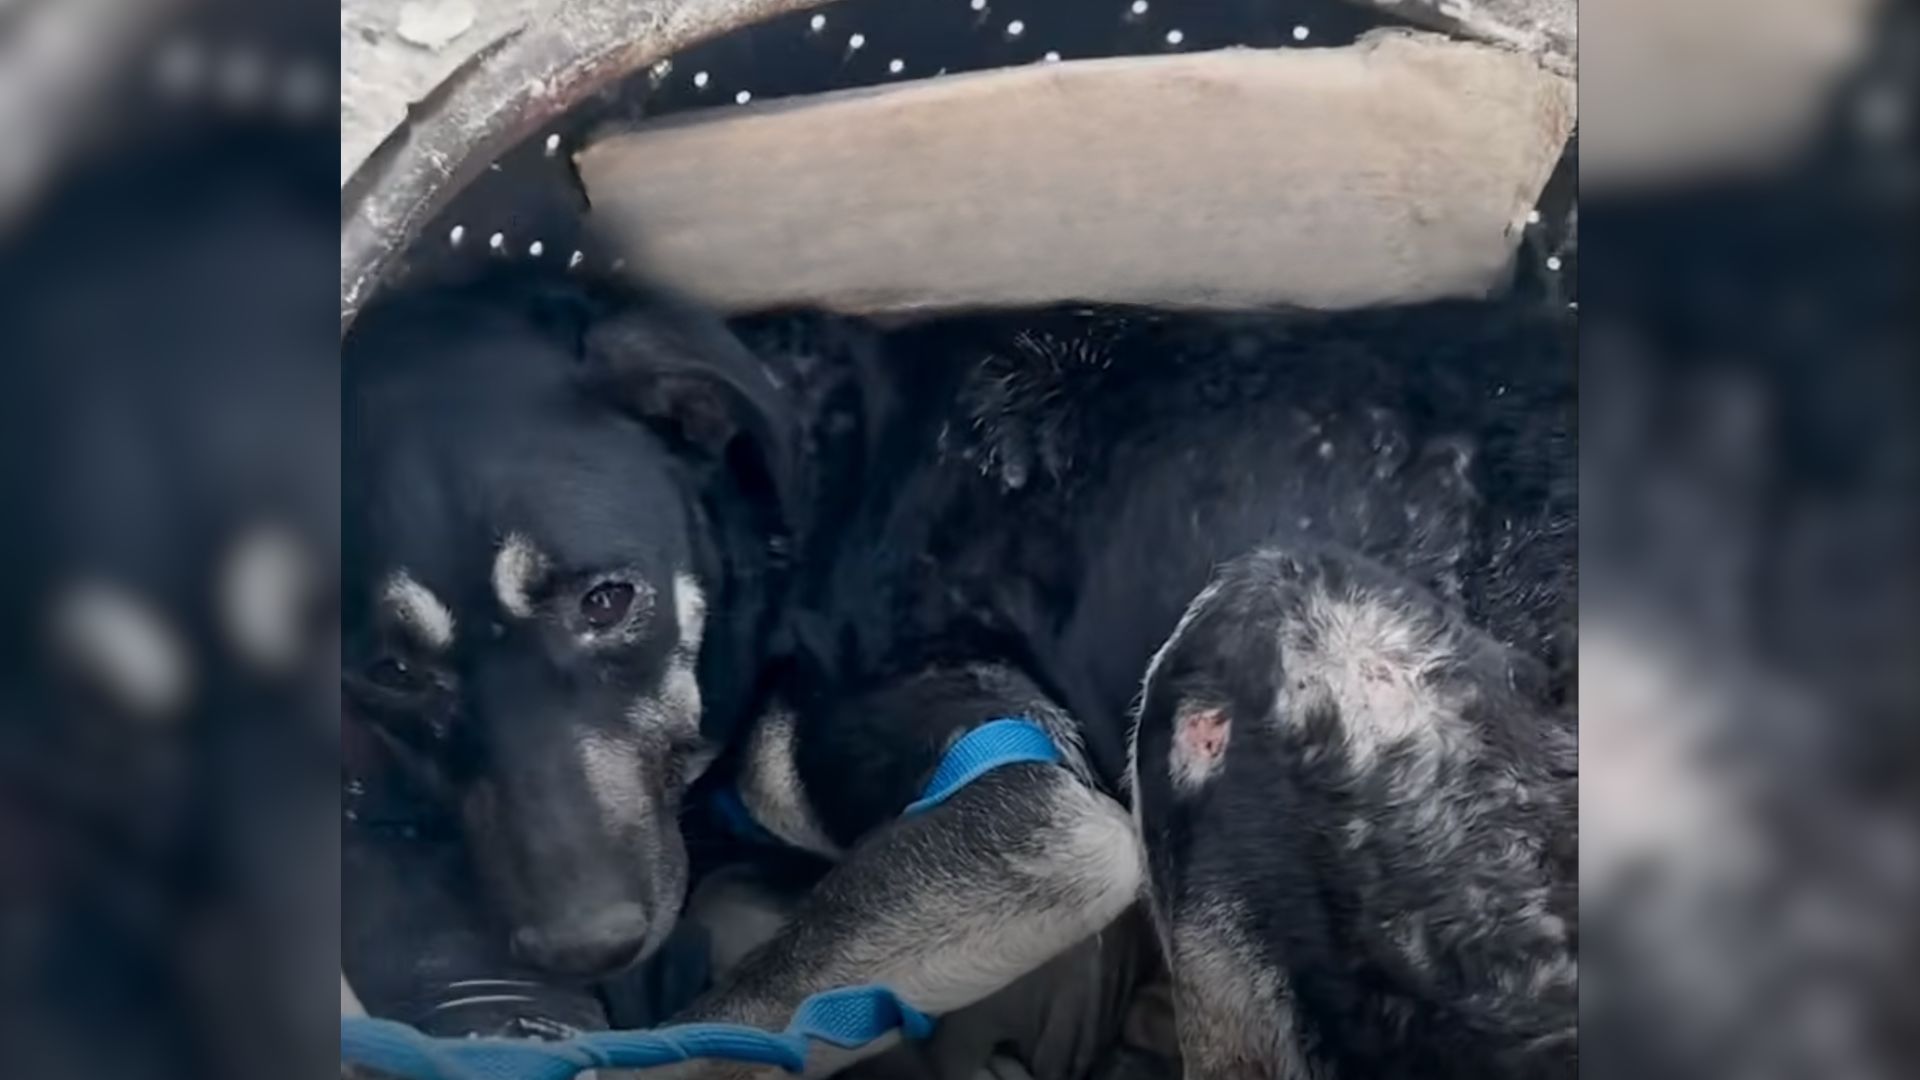 Poor Pup Was Curled Up In A Washing Machine Drum In A Fake Shelter Before Rescuers Came To Help